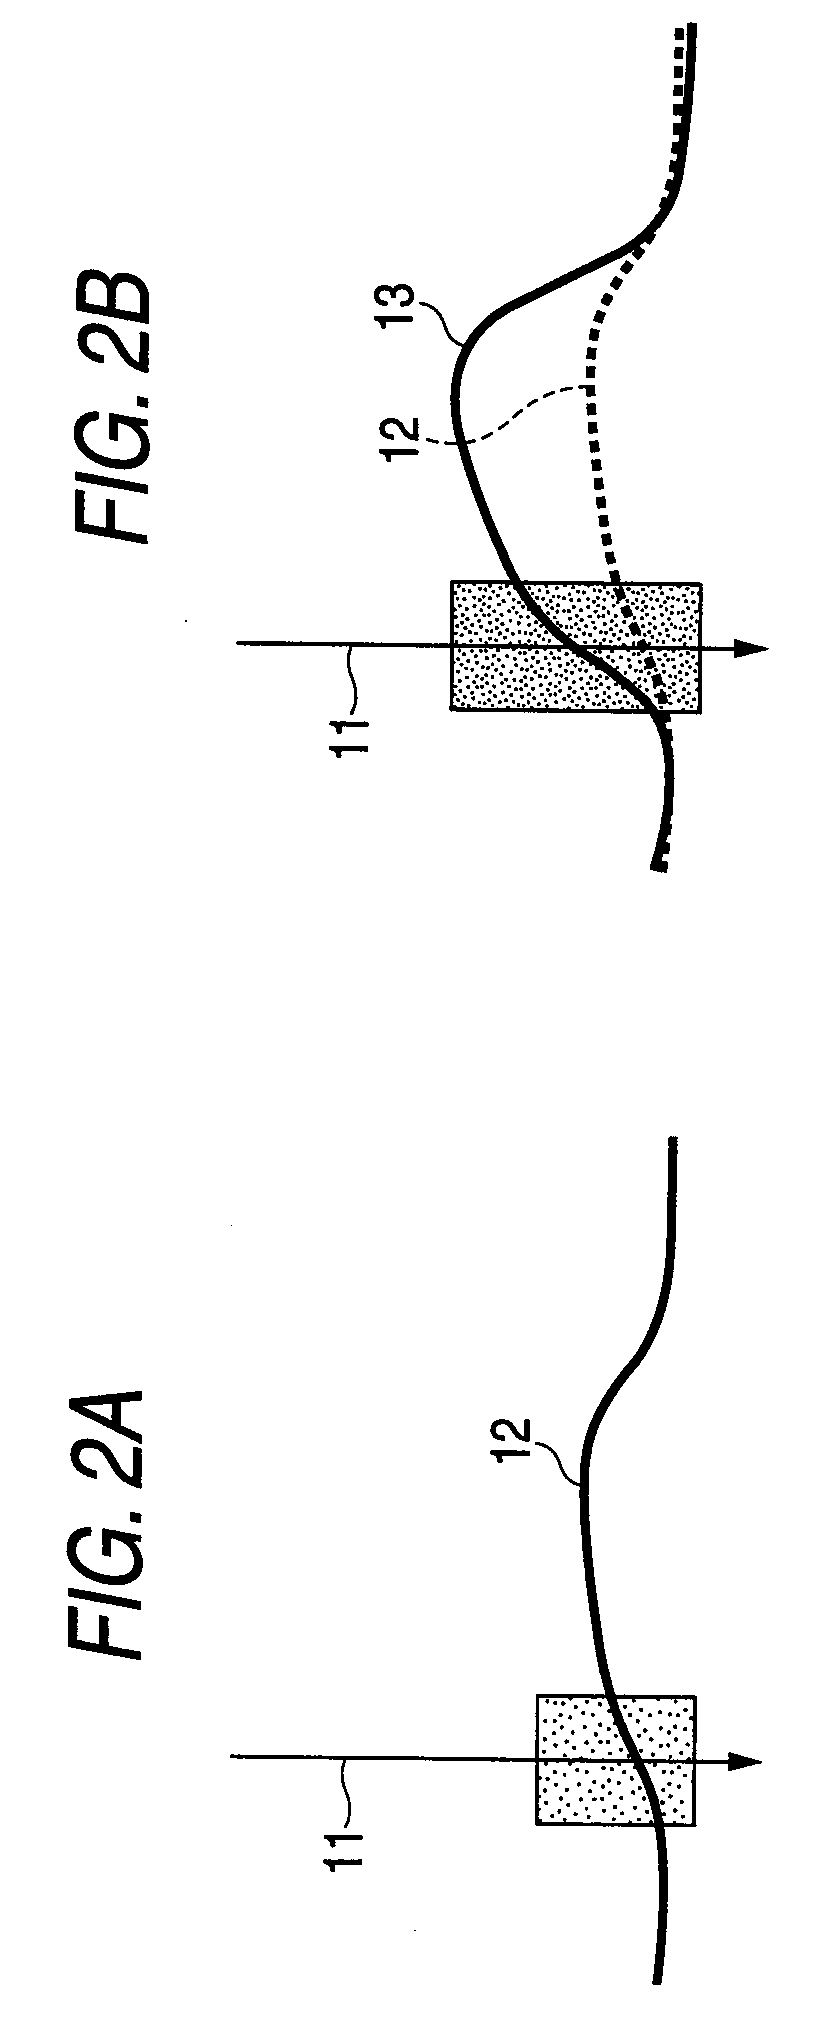 Image processing method and computer readable medium for image processing